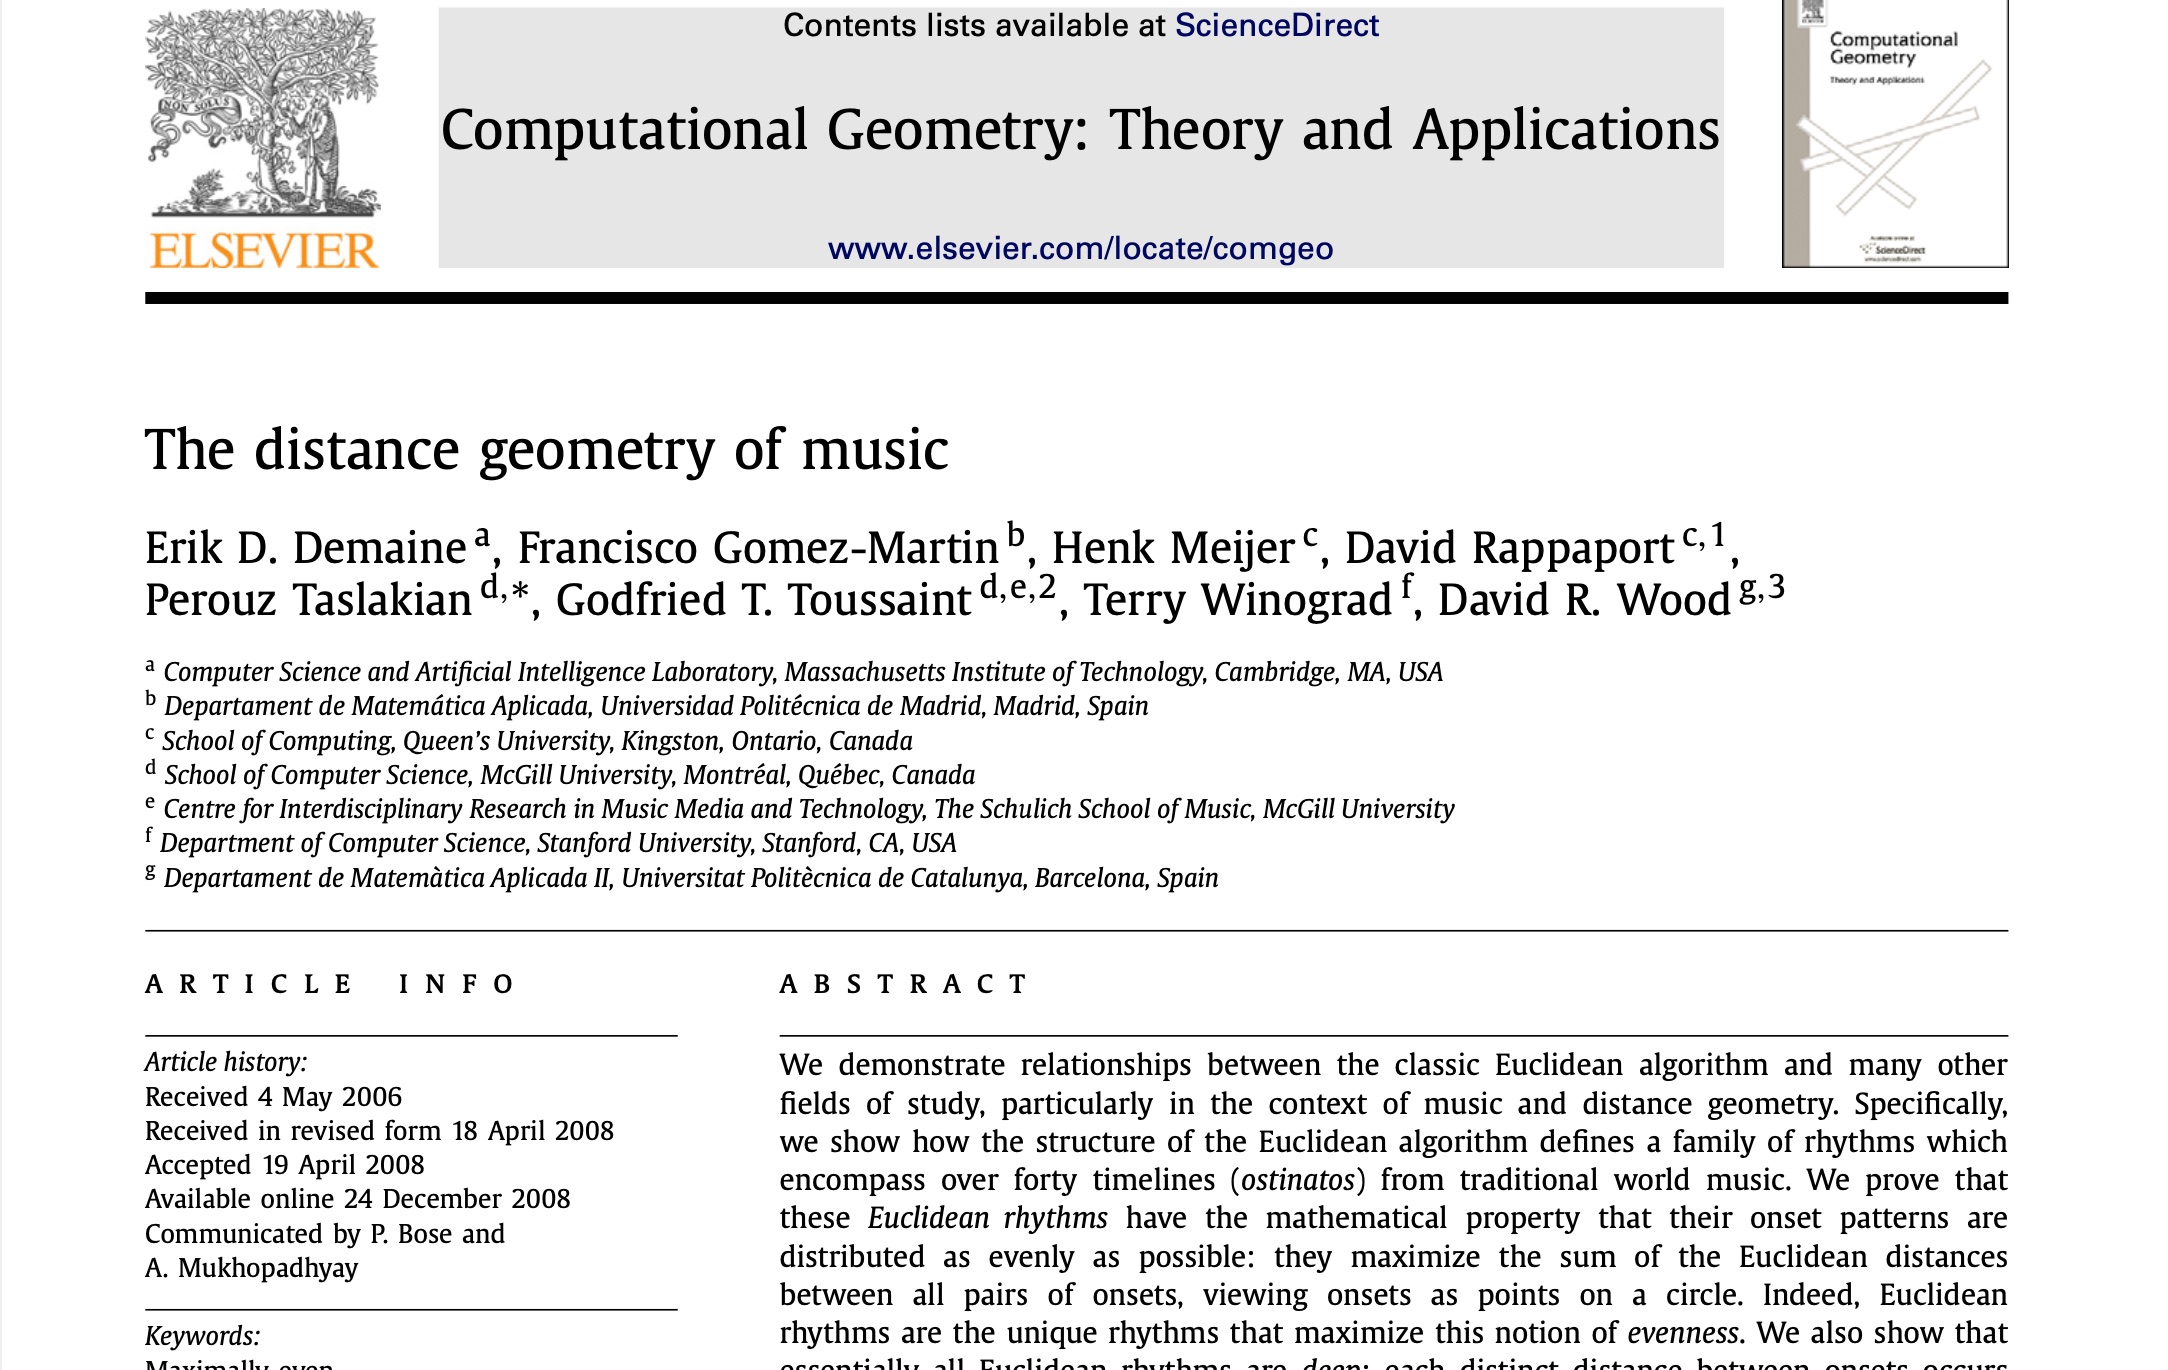 first page of 'distance geometry of music' paper